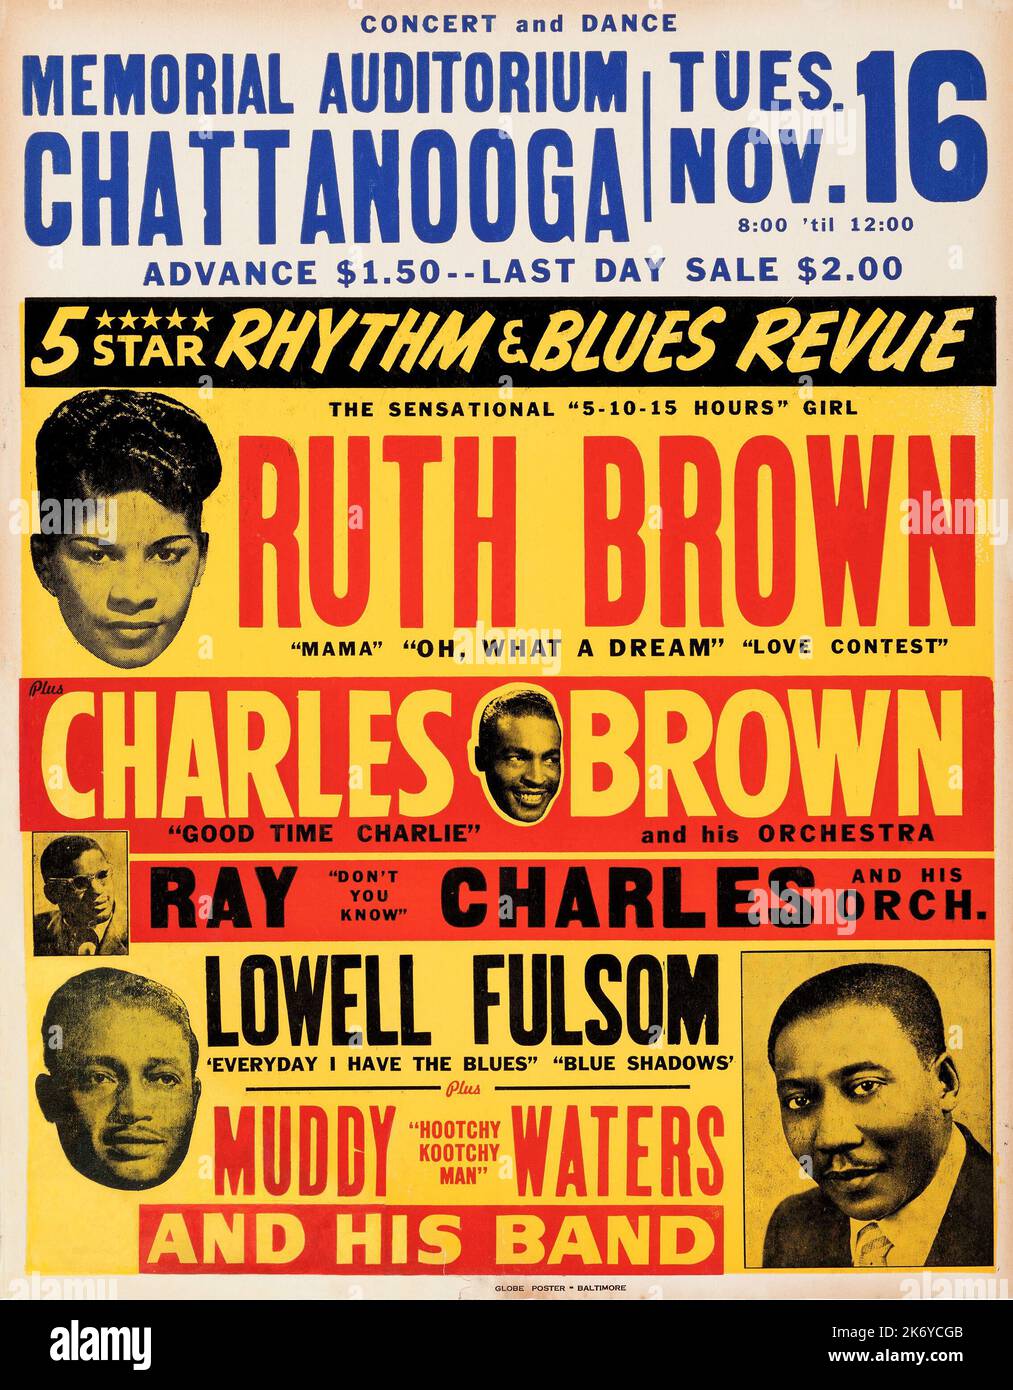 Muddy Waters, Ray Charles, Ruth Brown 1954 R&B Revue concert Poster Banque D'Images